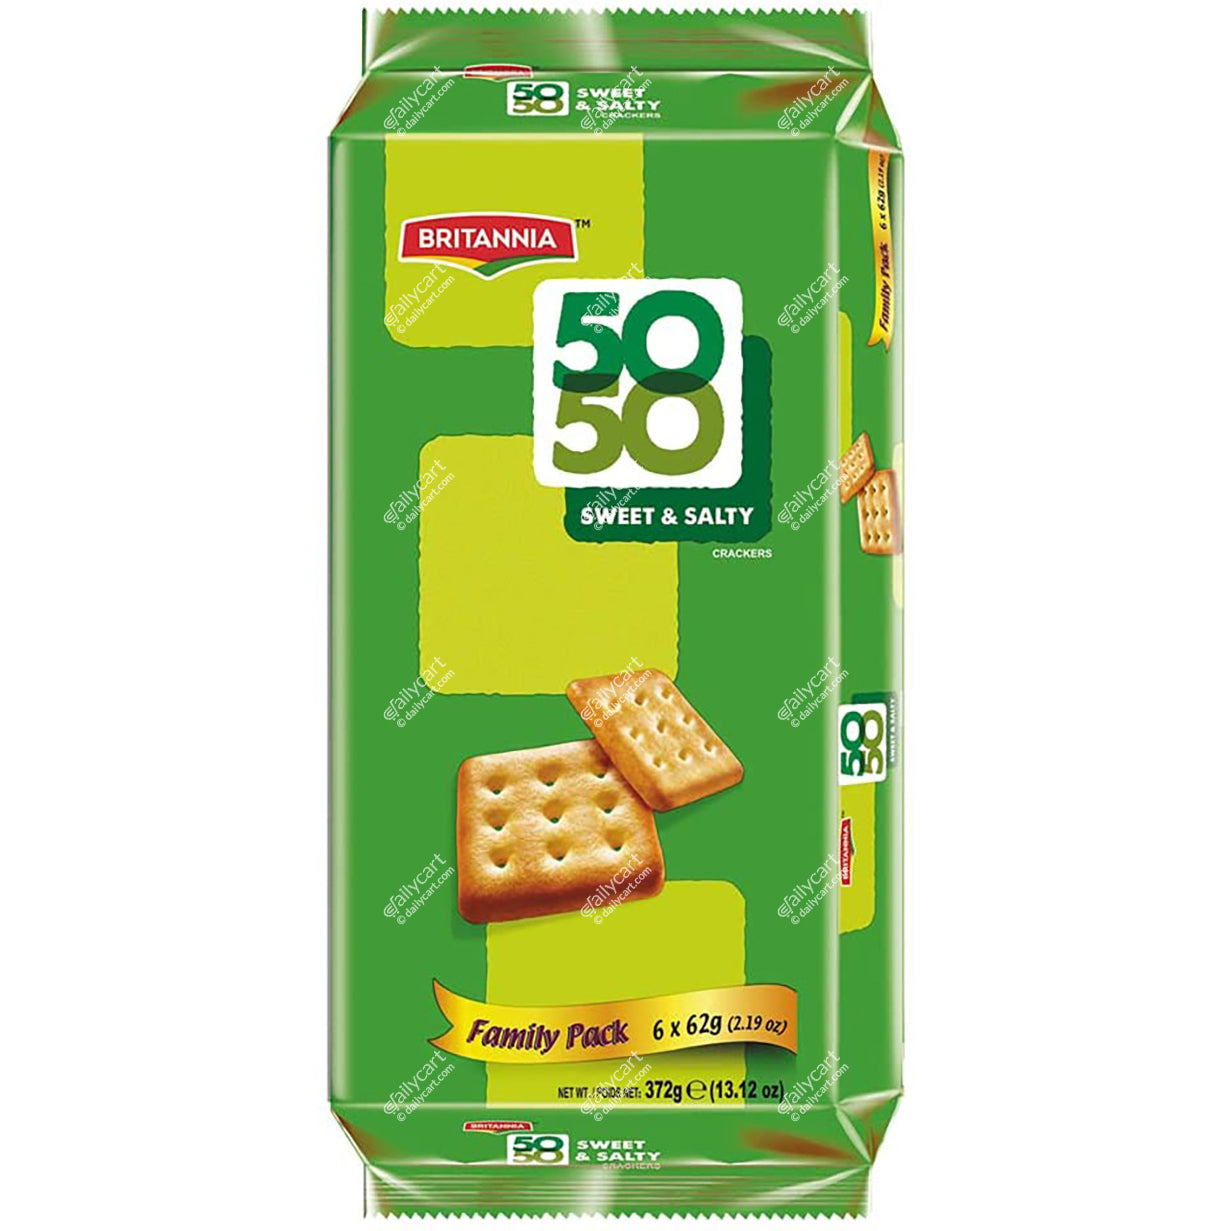 Britannia 50-50 Sweet & Salty Biscuits, 372 g, Family Pack